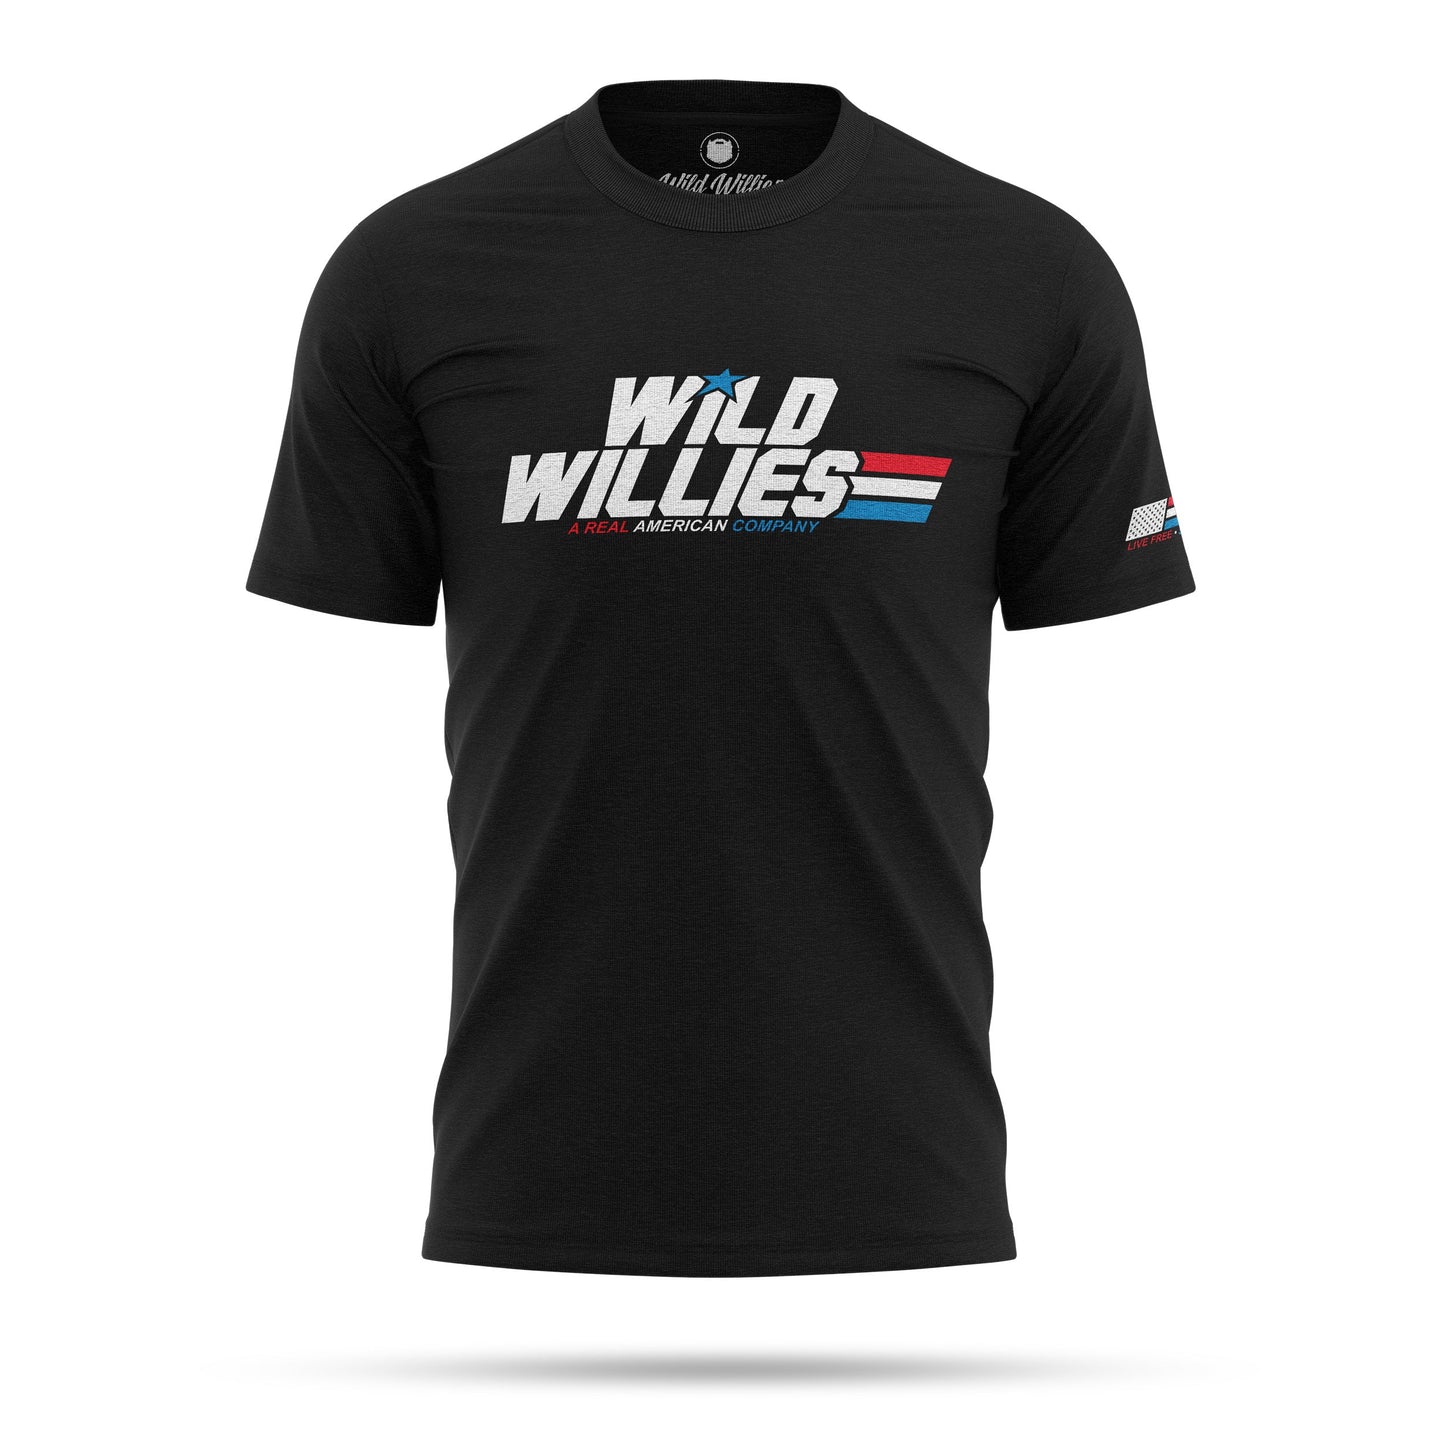 A Real American Company - T-Shirt T-Shirt Wild-Willies S Black 